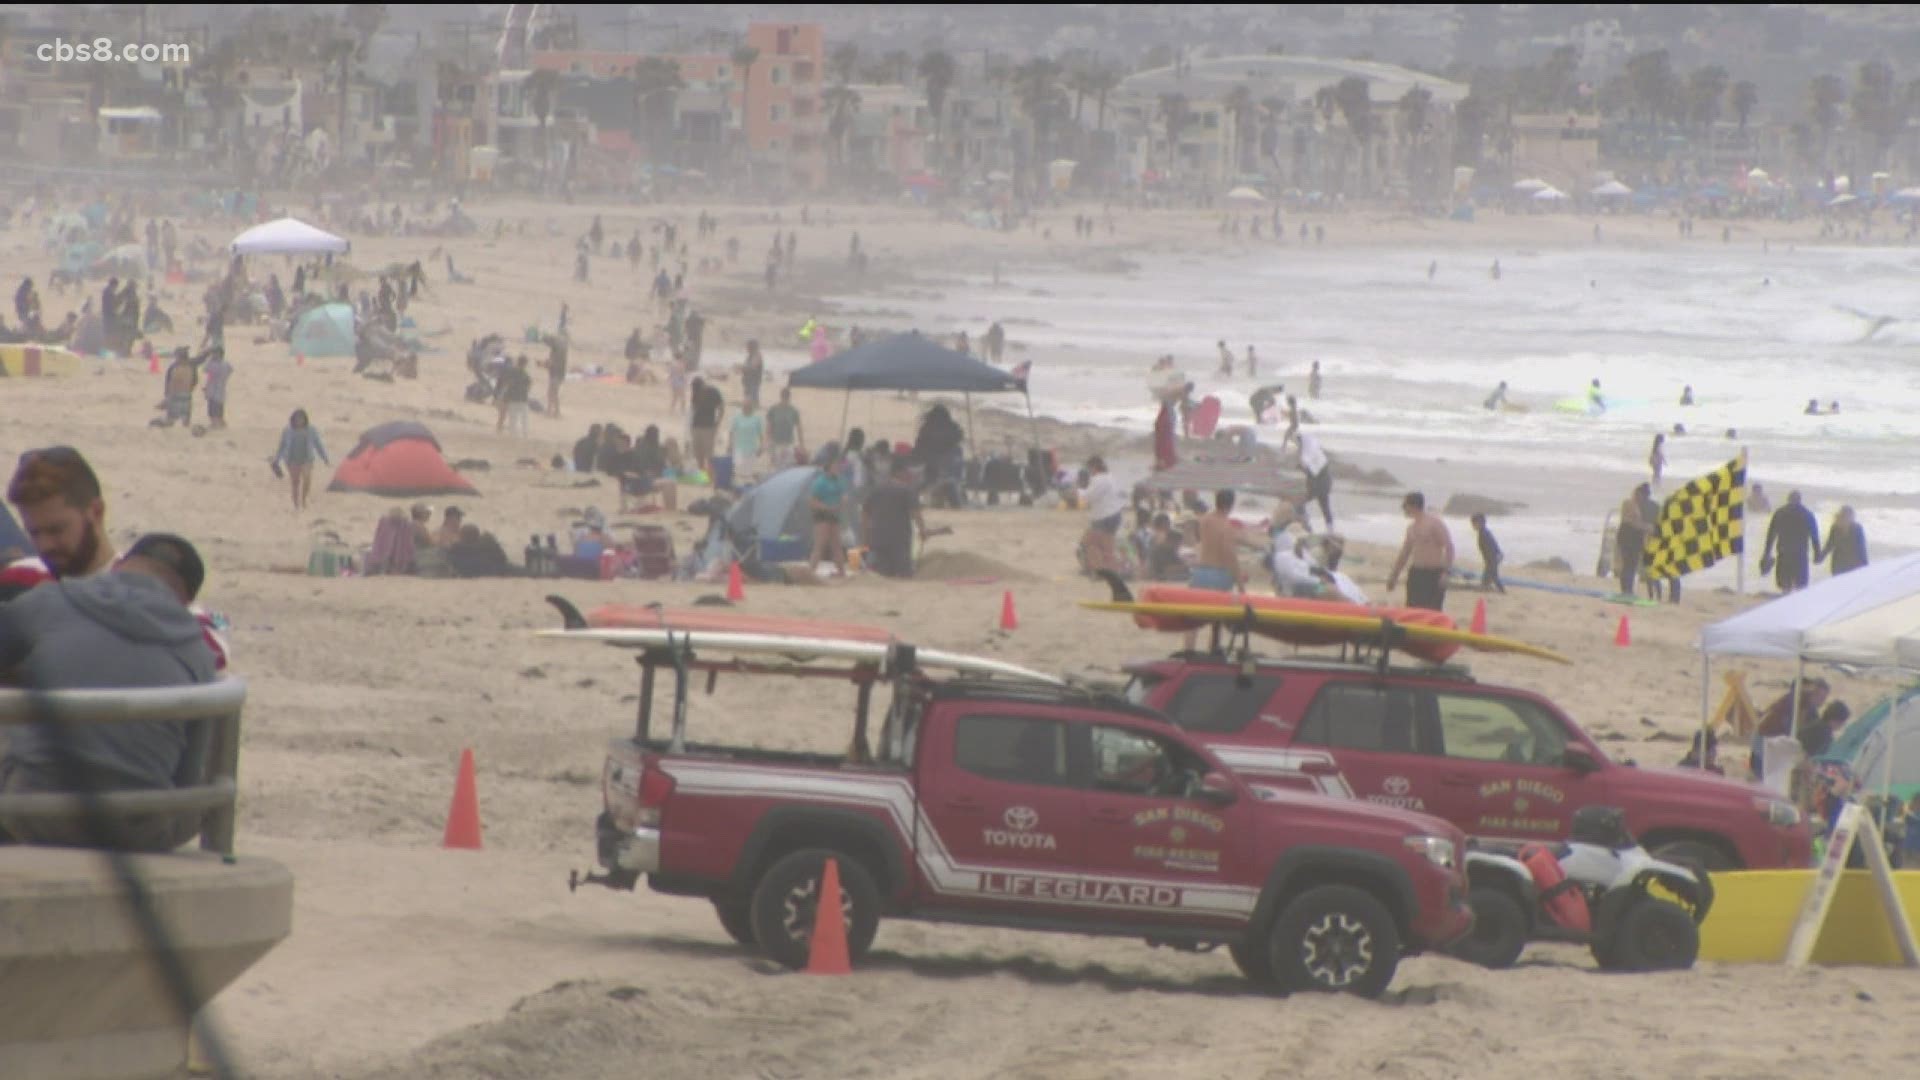 San Diego Lifeguards say they will have extra patrols out during the busy holiday weekend.